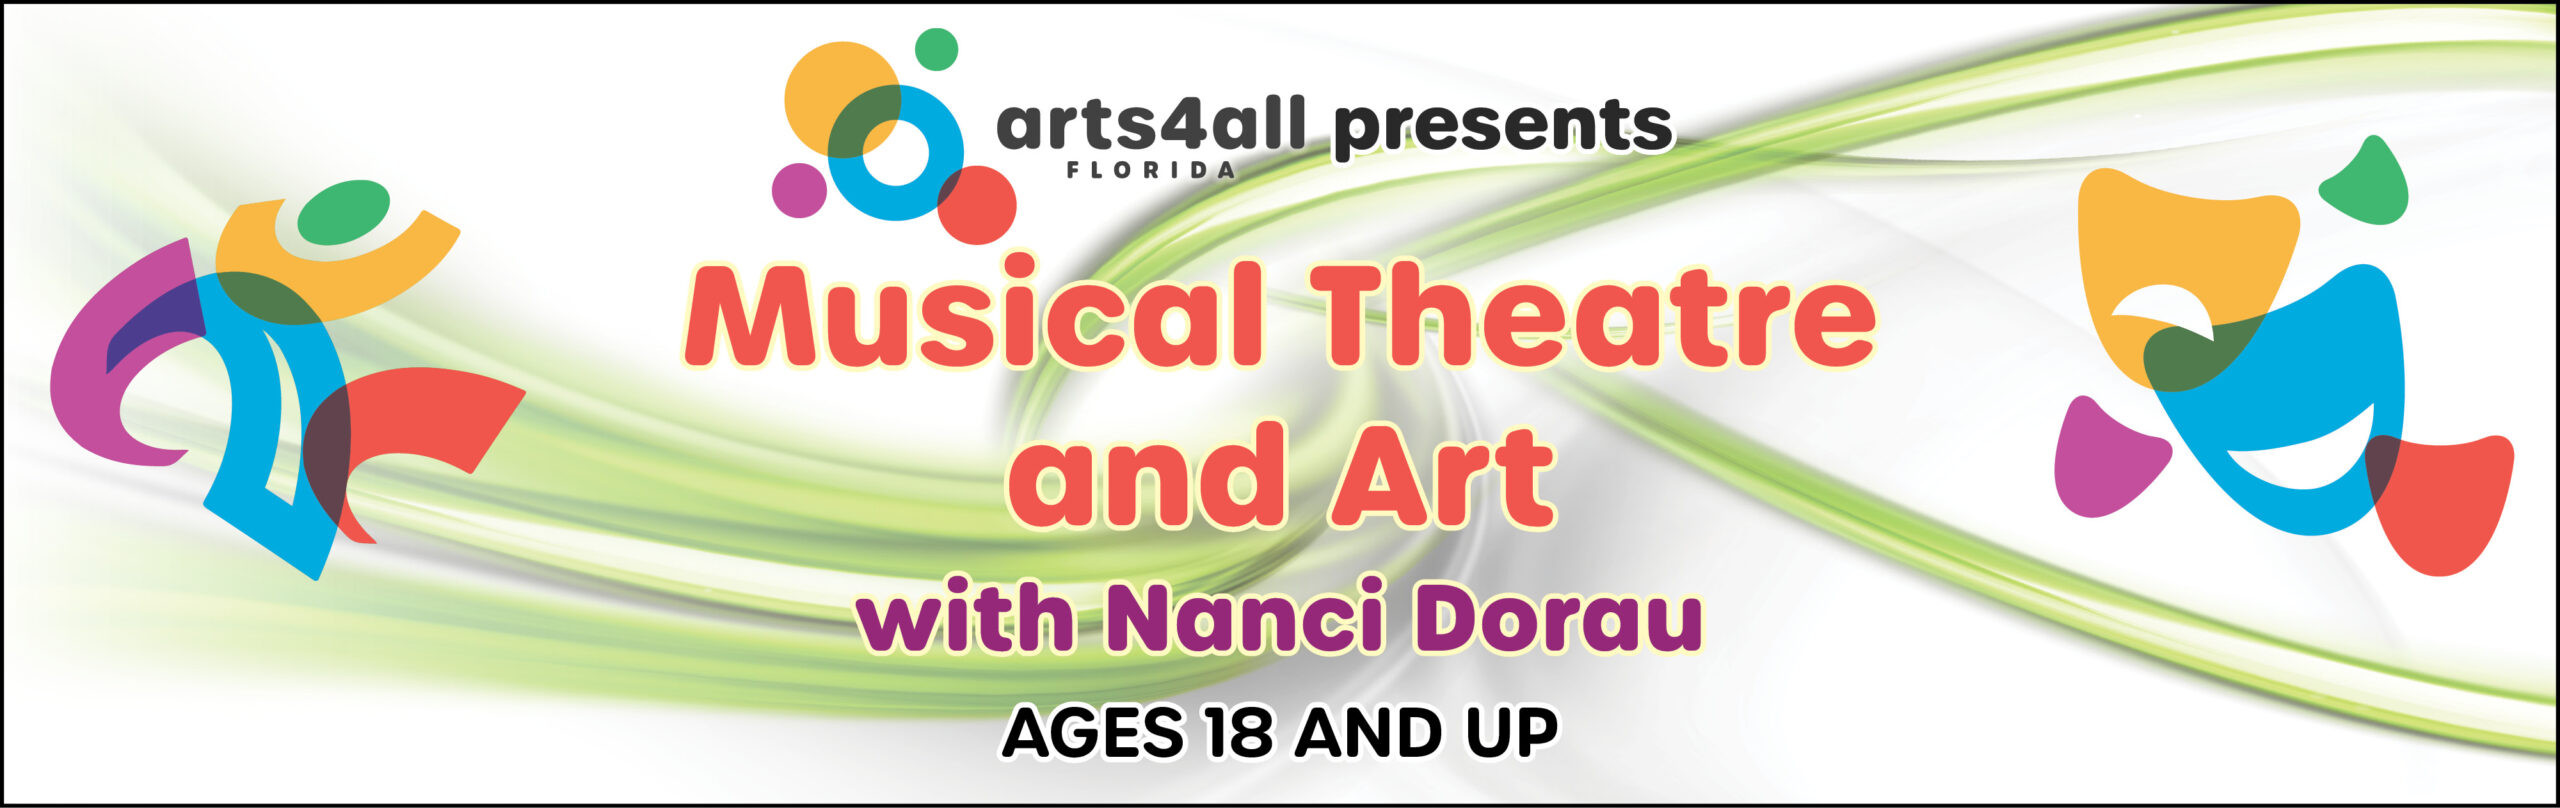 This graphic is for Arts4All Musical Theatre and Art.